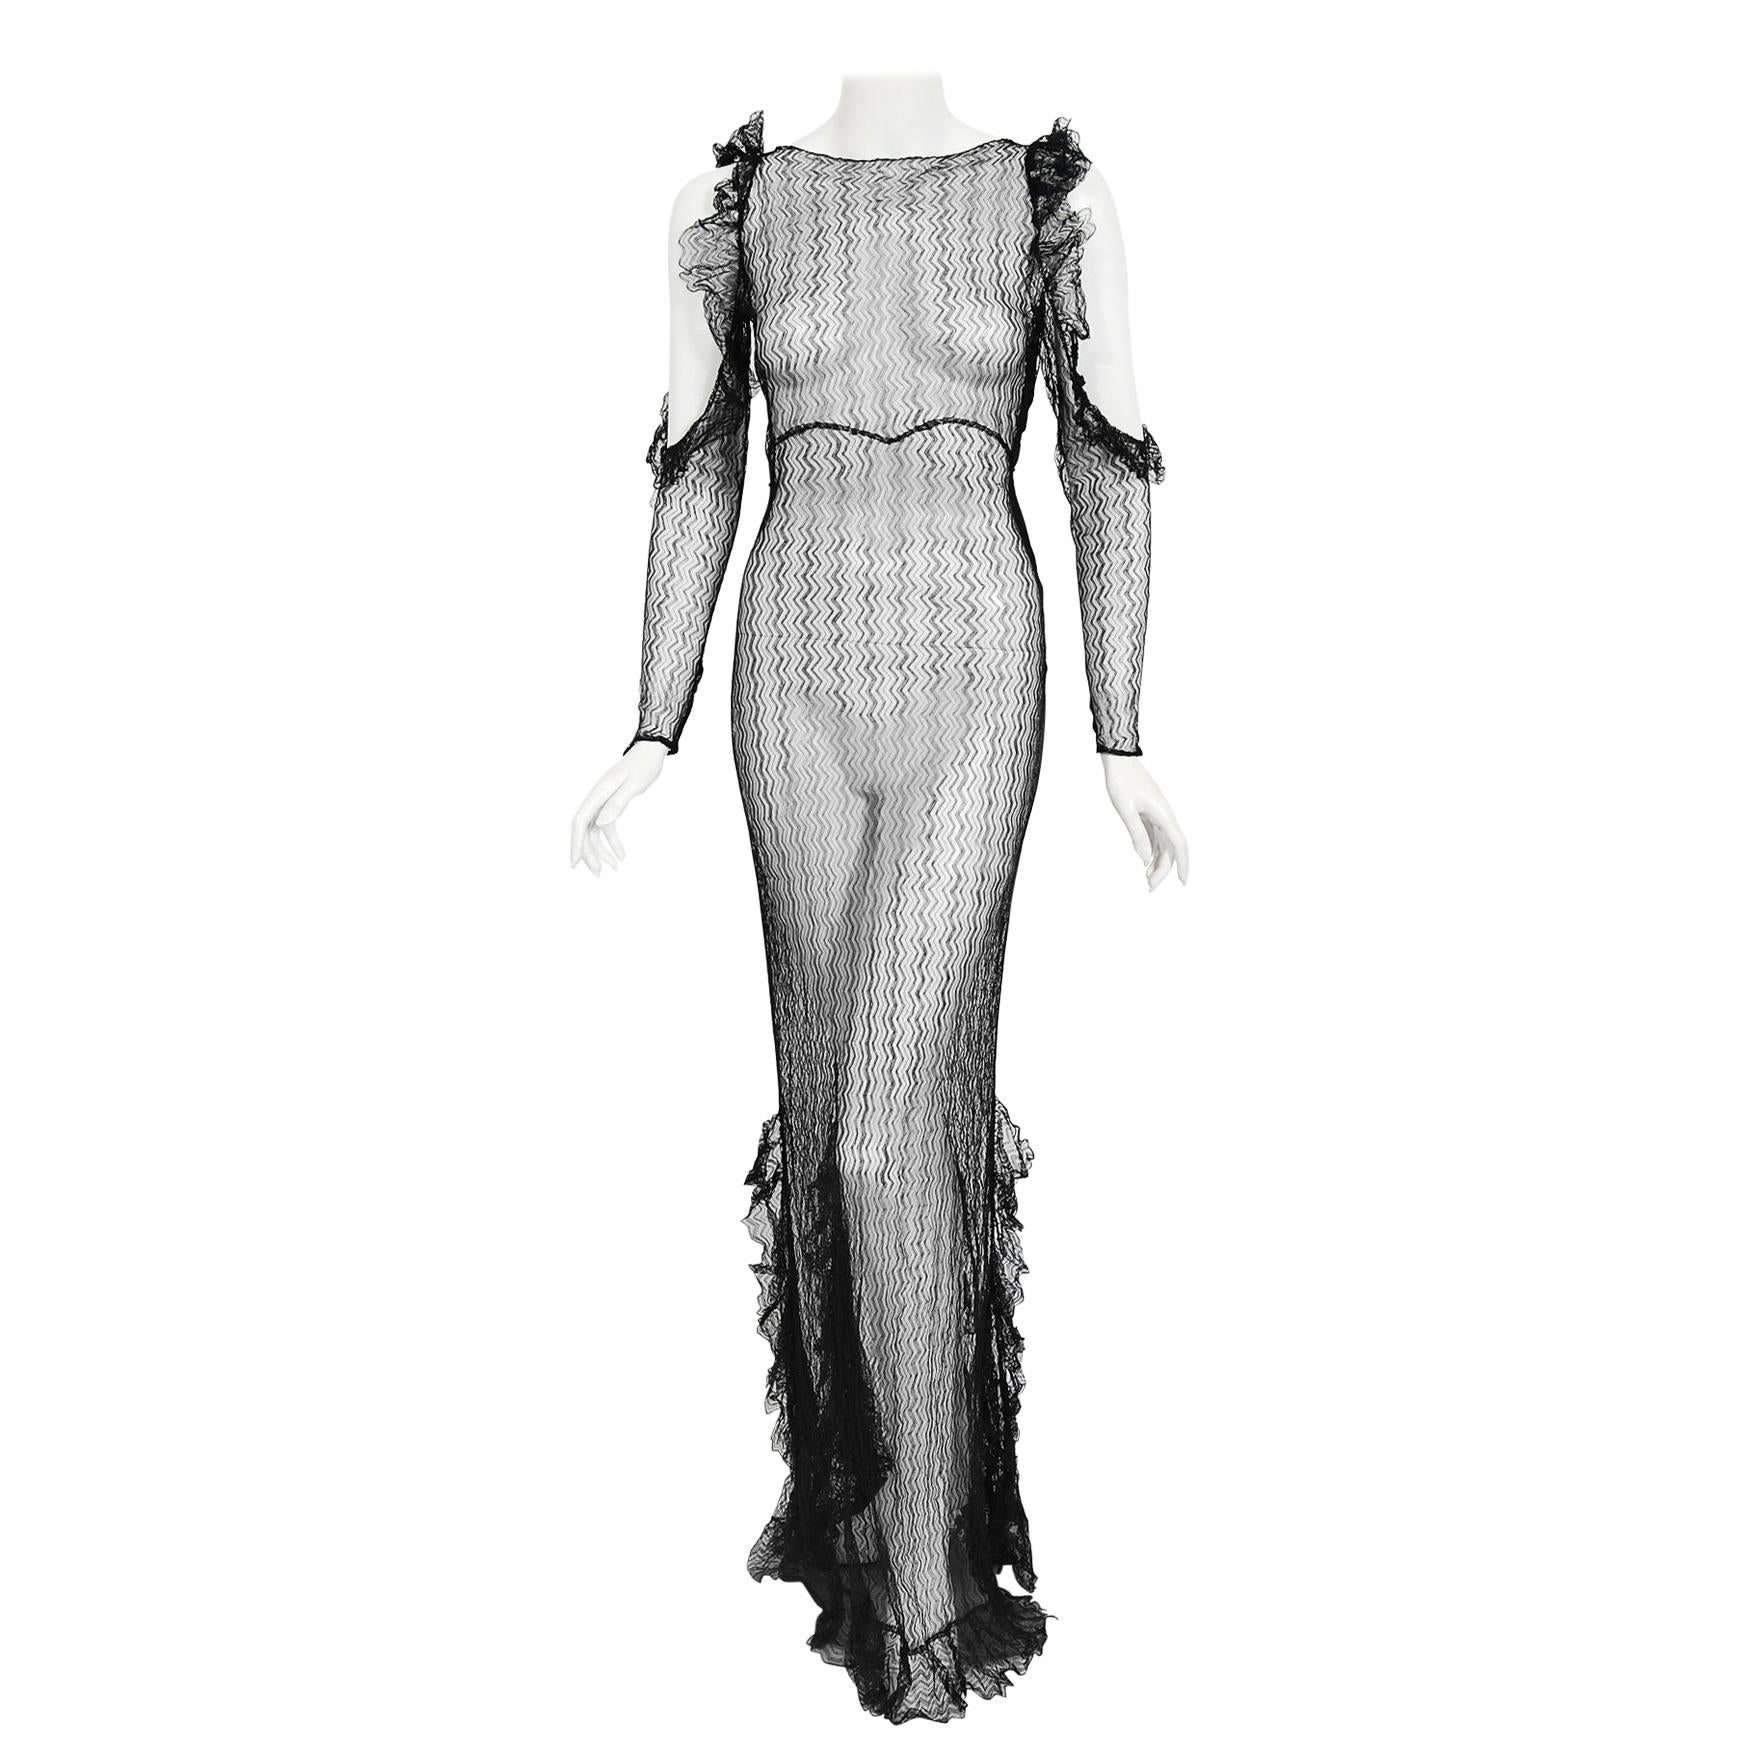 Vintage 1930's Sheer Black Lace Cut-Out Long Sleeve Bias-Cut Backless Gown